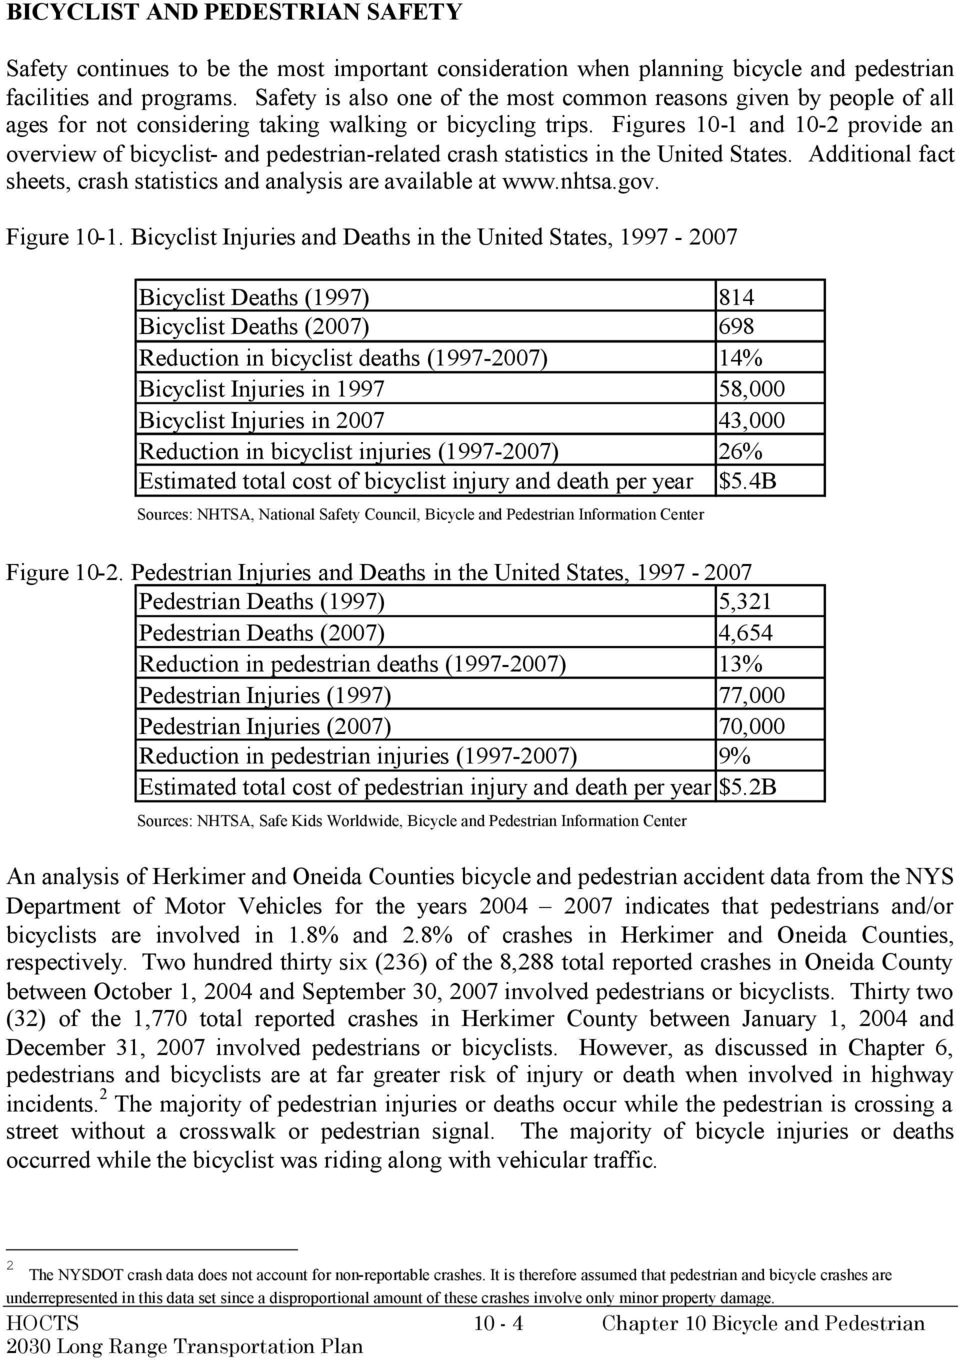 Figures 10-1 and 10-2 provide an overview of bicyclist- and pedestrian-related crash statistics in the United States. Additional fact sheets, crash statistics and analysis are available at www.nhtsa.